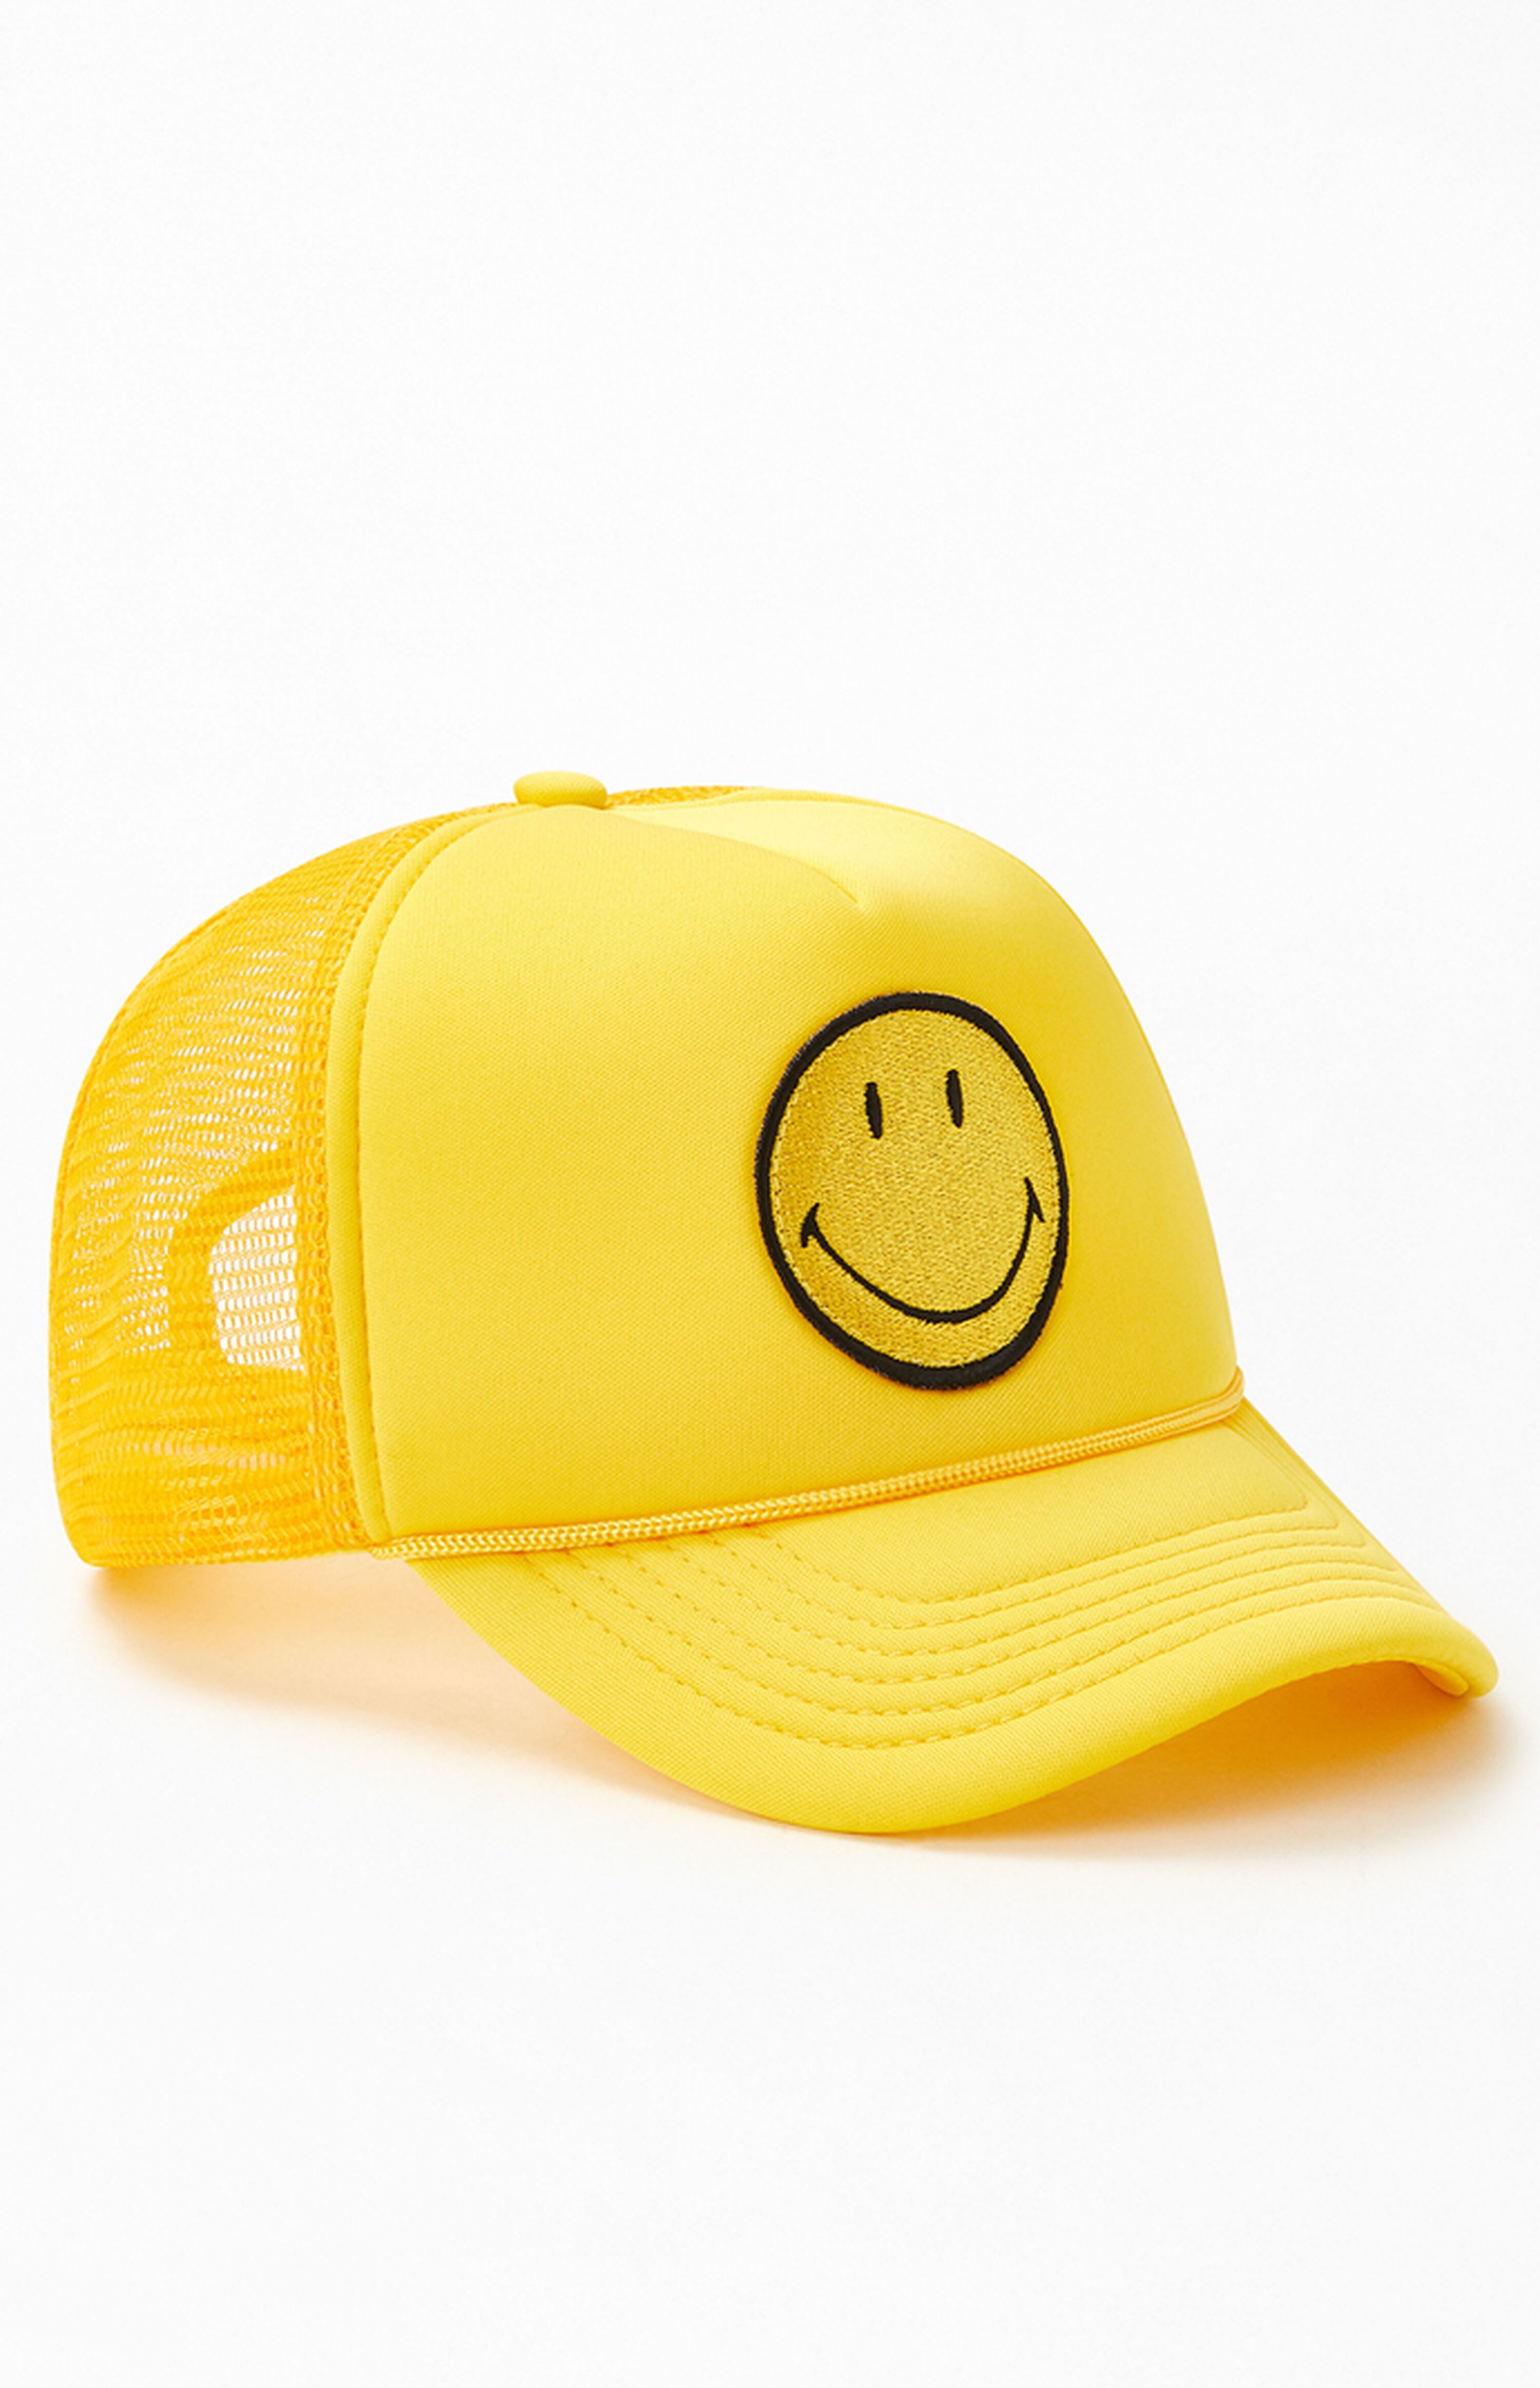 Smiley Face Trucker Hat | PacSun